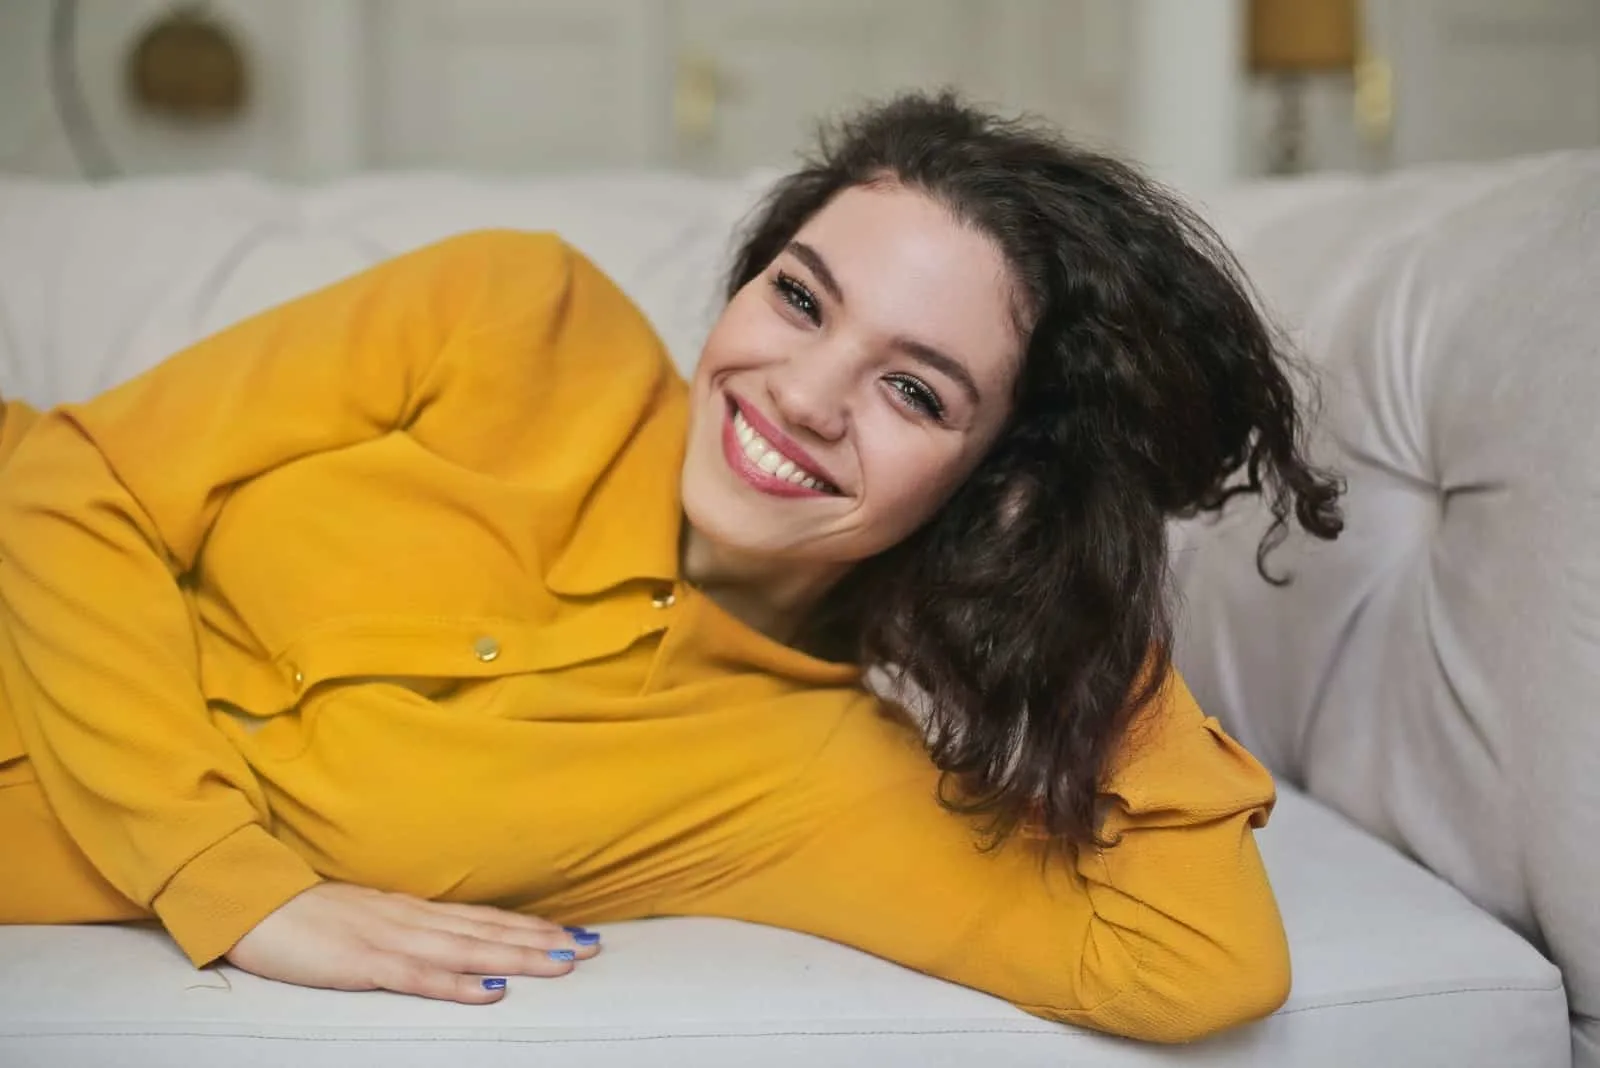 woman in yellow shirt smiling while laying on sofa